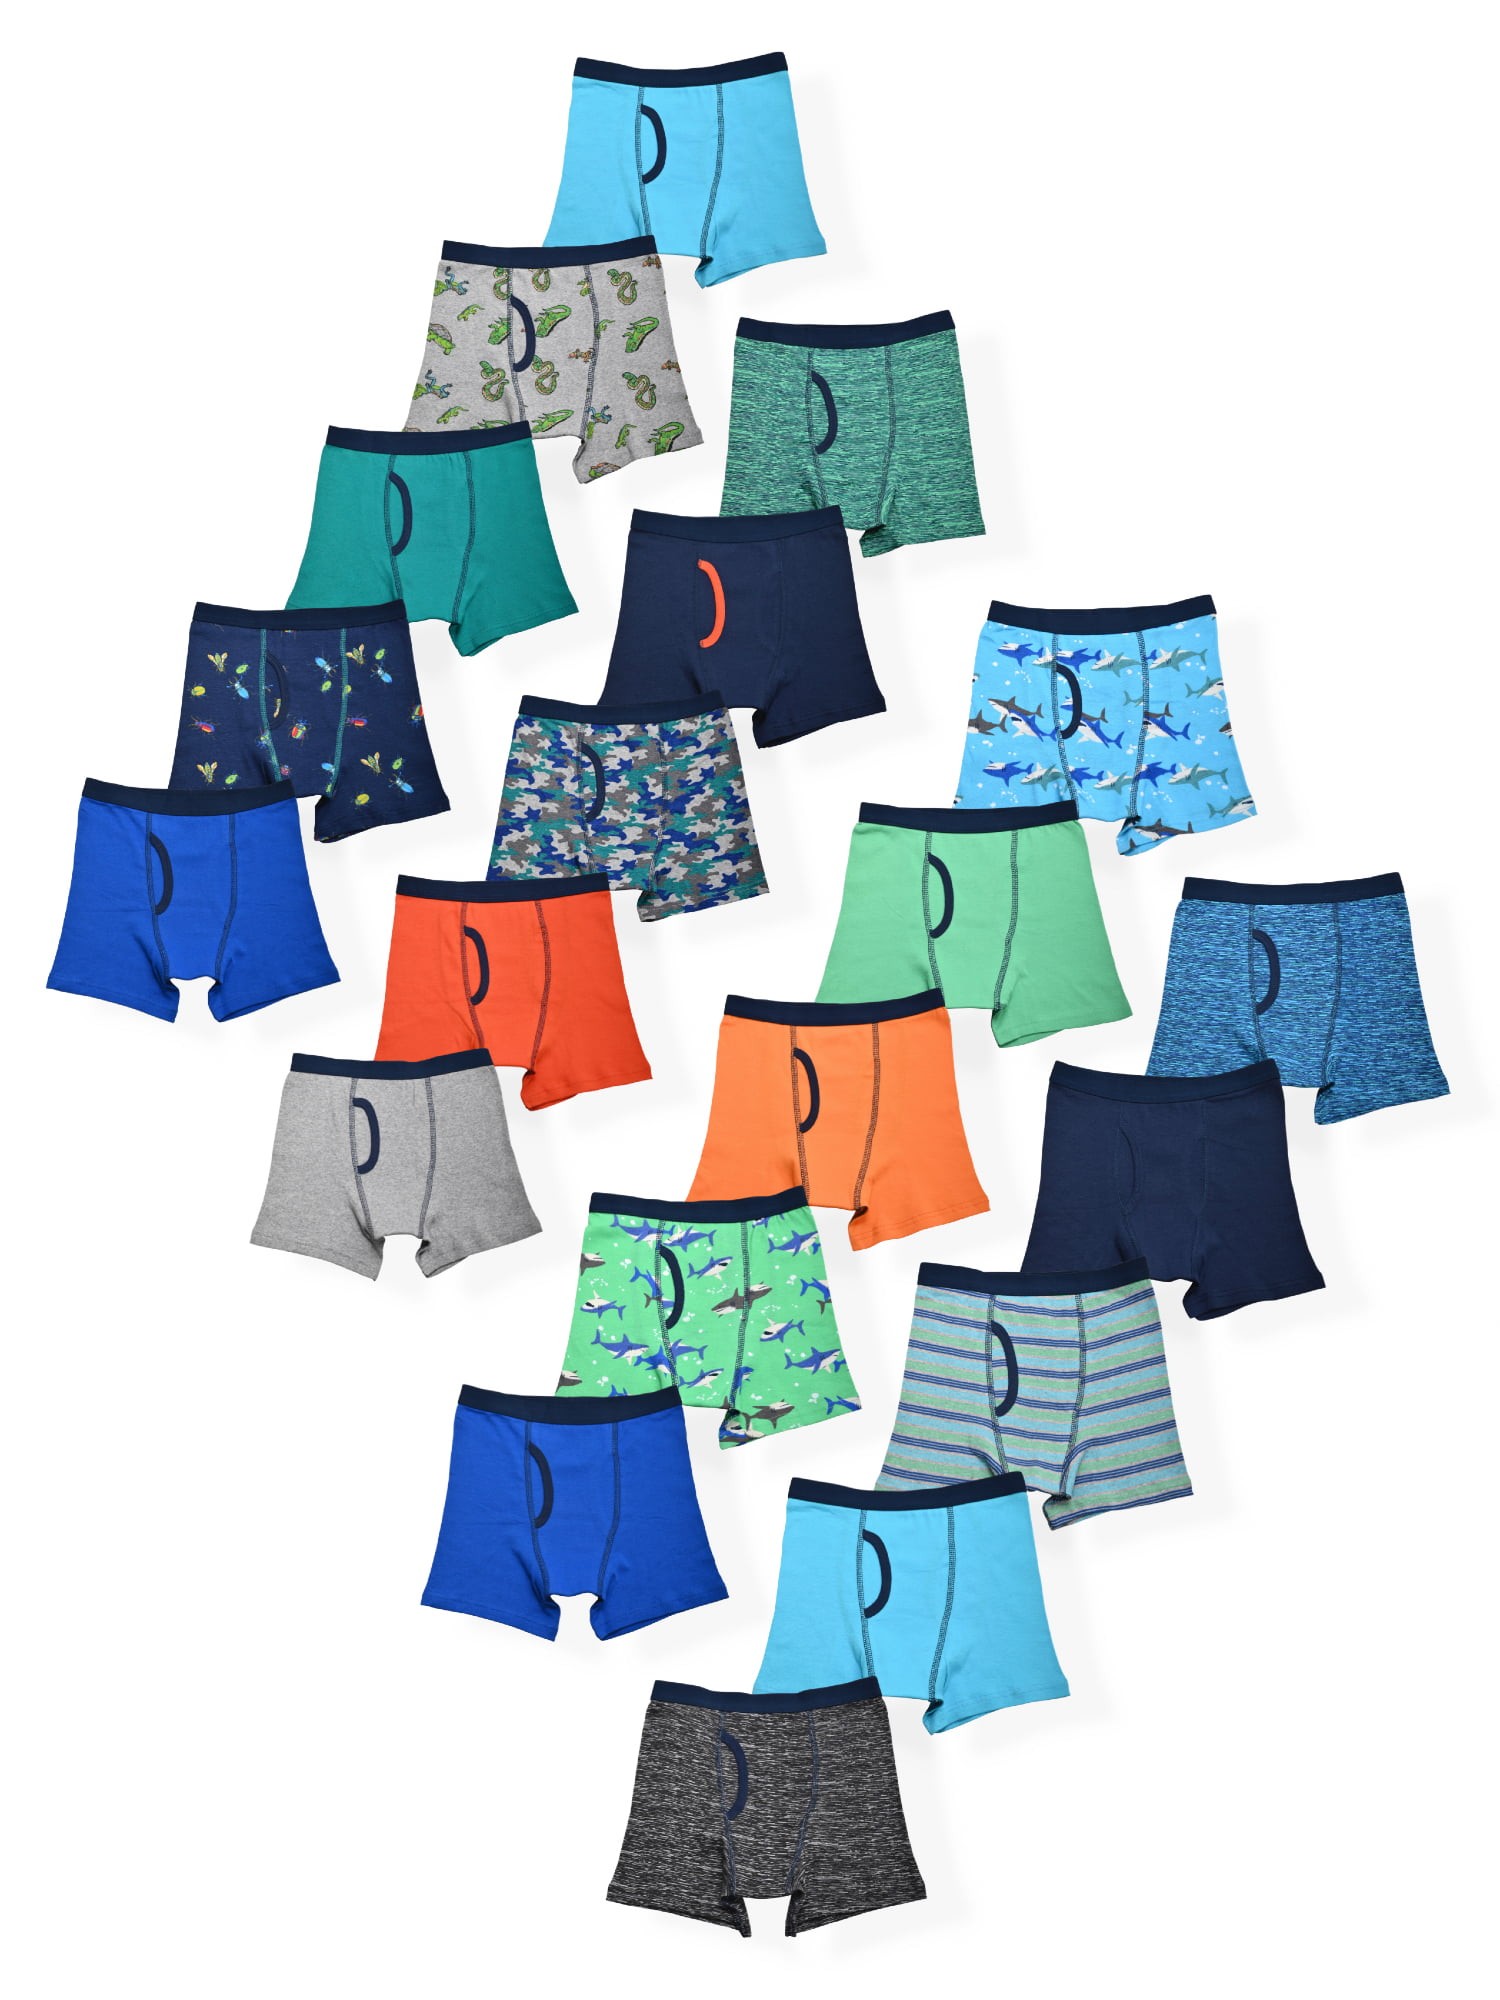 Fruit of the Loom Toddler Boy Cotton Boxer Briefs, 10 Pack